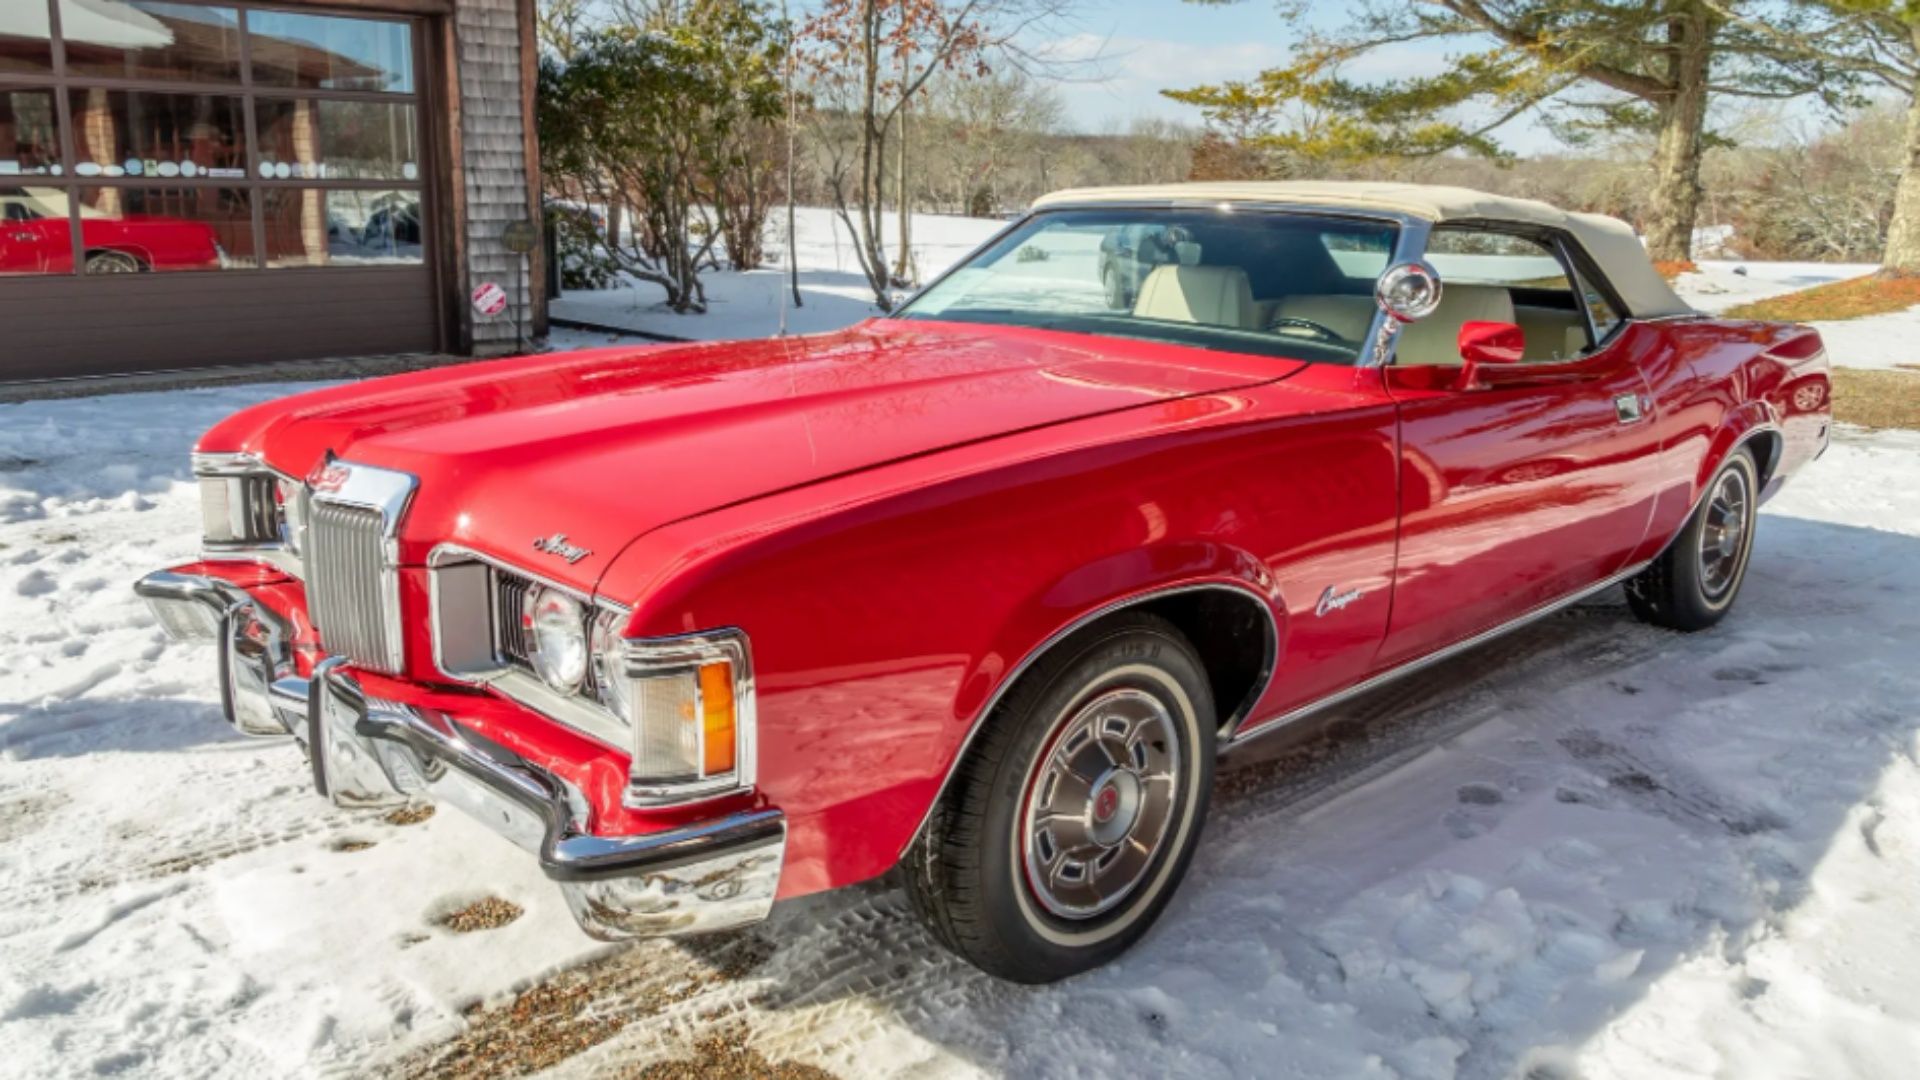 Image of a red 1973 Mercury Cougar XR-7